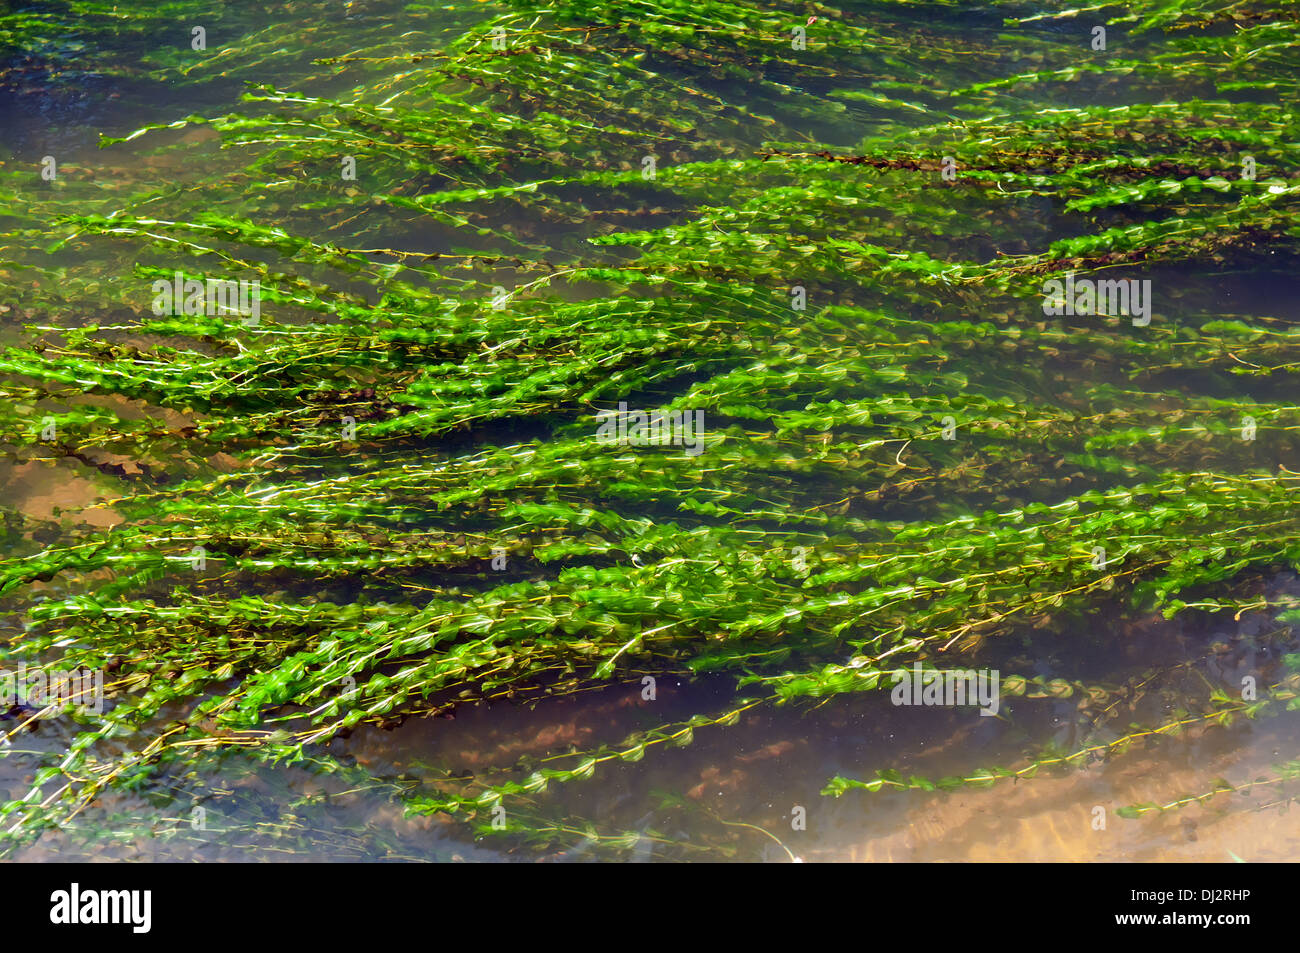 Water plants in flowing water Stock Photo